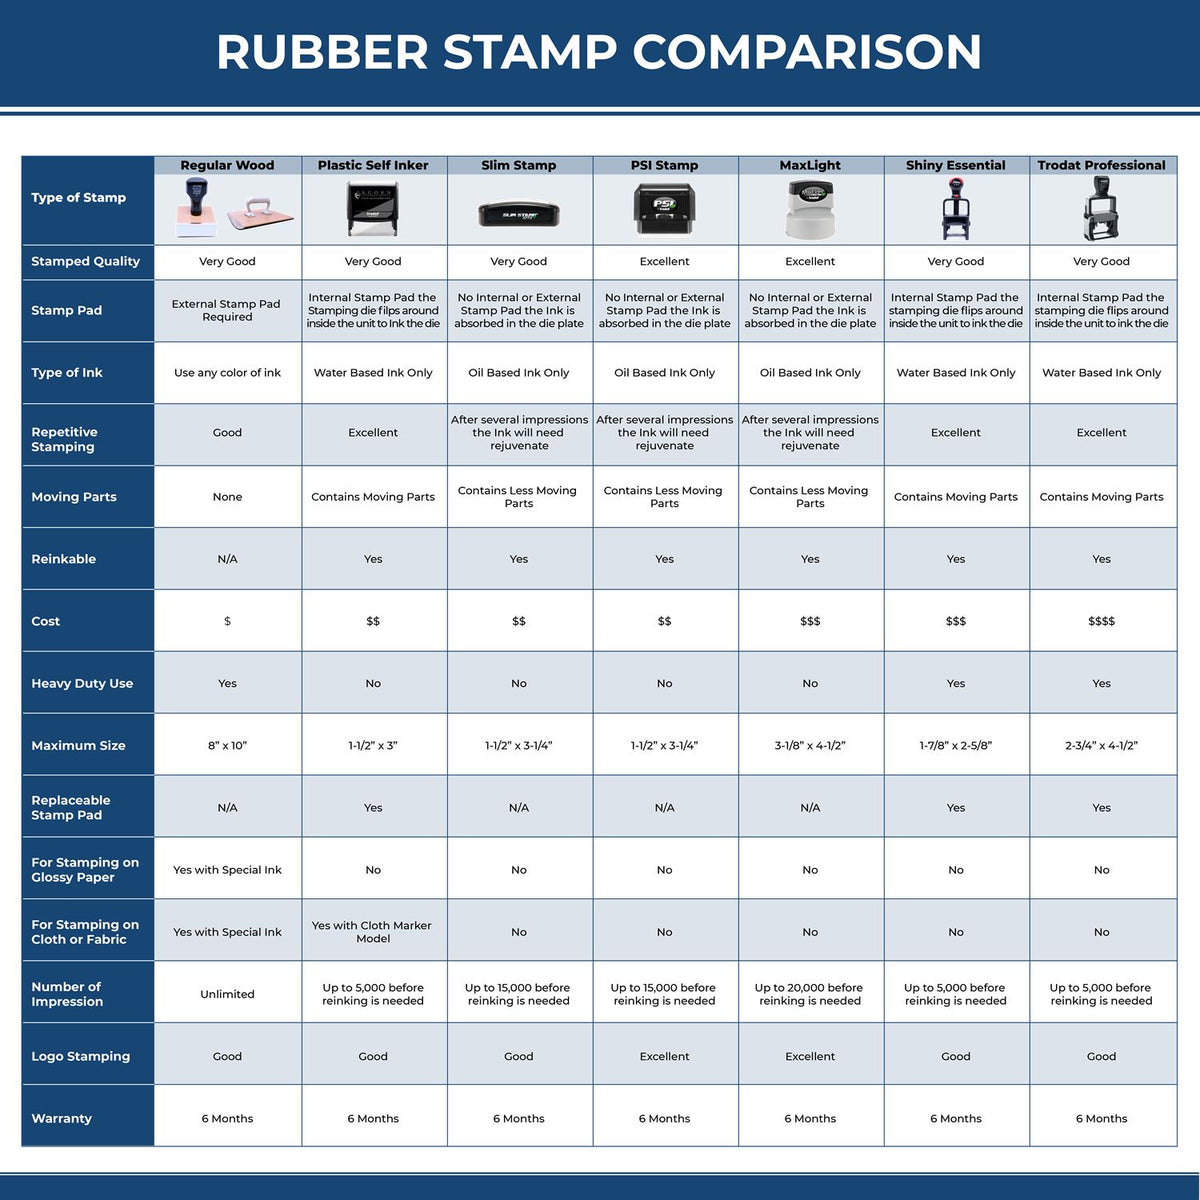 A comparison chart for the different types of mount models available for the Self-Inking Rectangular North Dakota Notary Stamp.